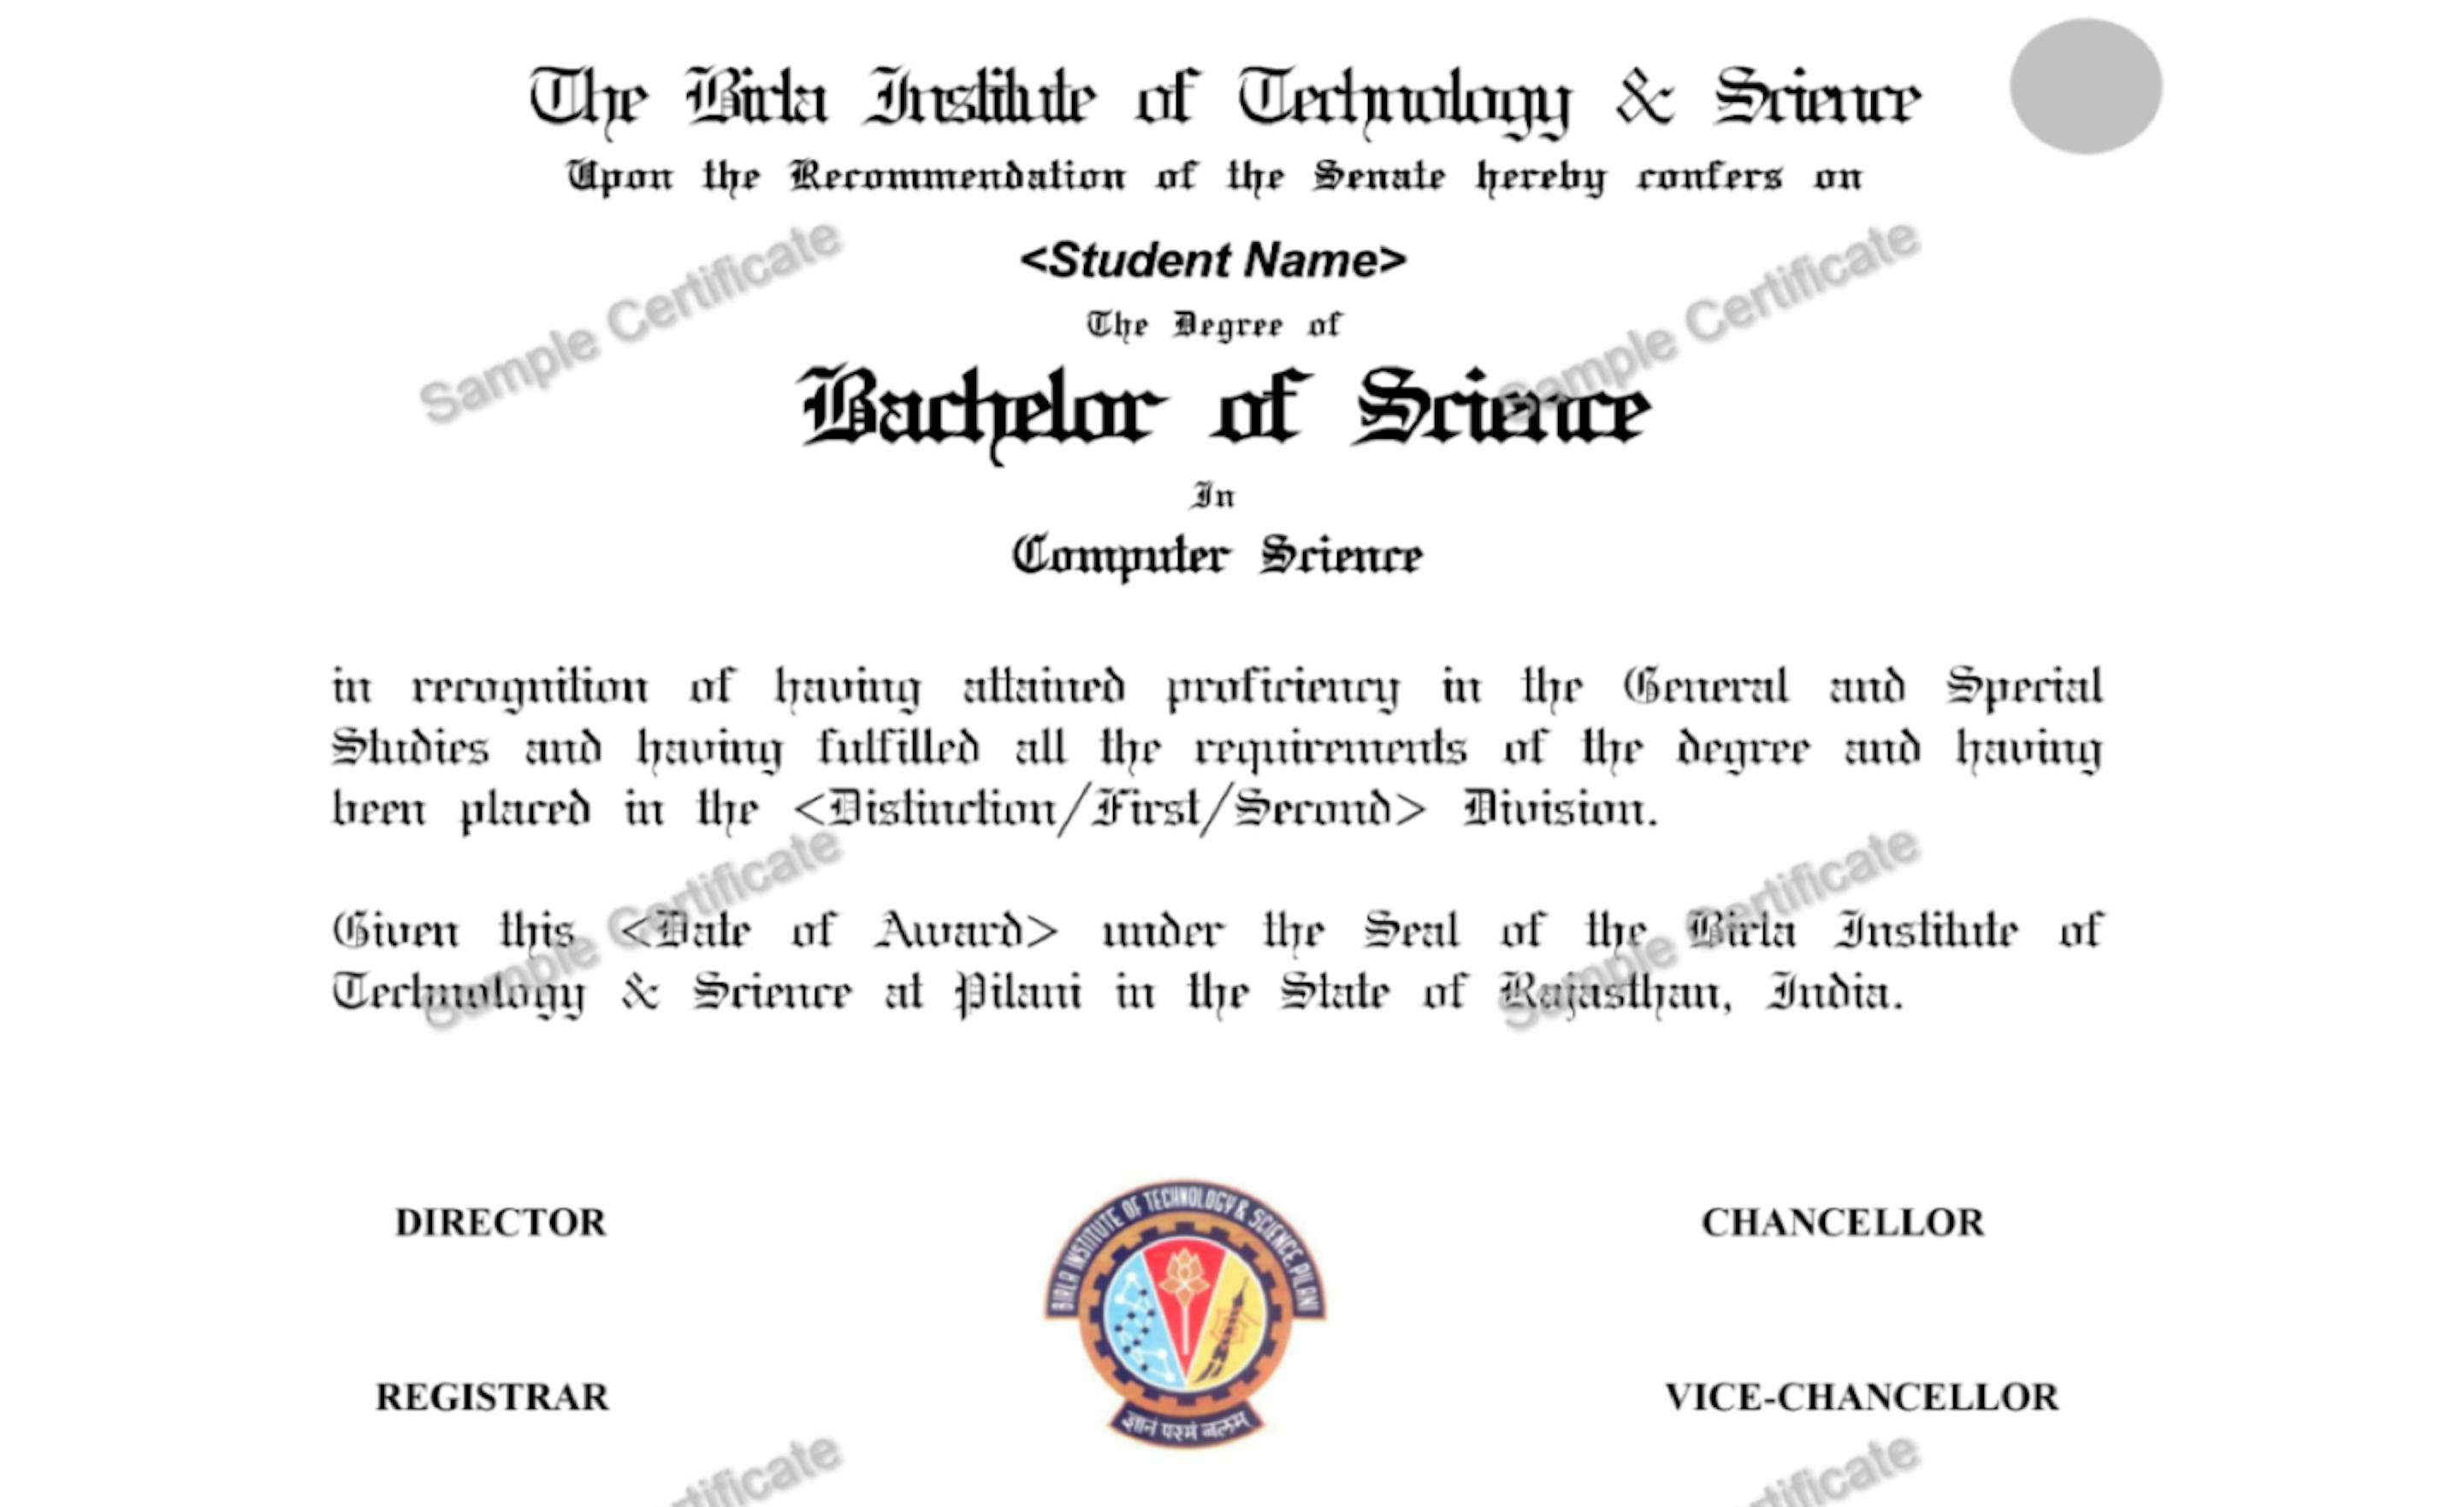 Sample Degree Certificate For B.Sc. Computer Science Programme Students   Front Side  1  ?auto=format%2Ccompress&dpr=2&w=&h=